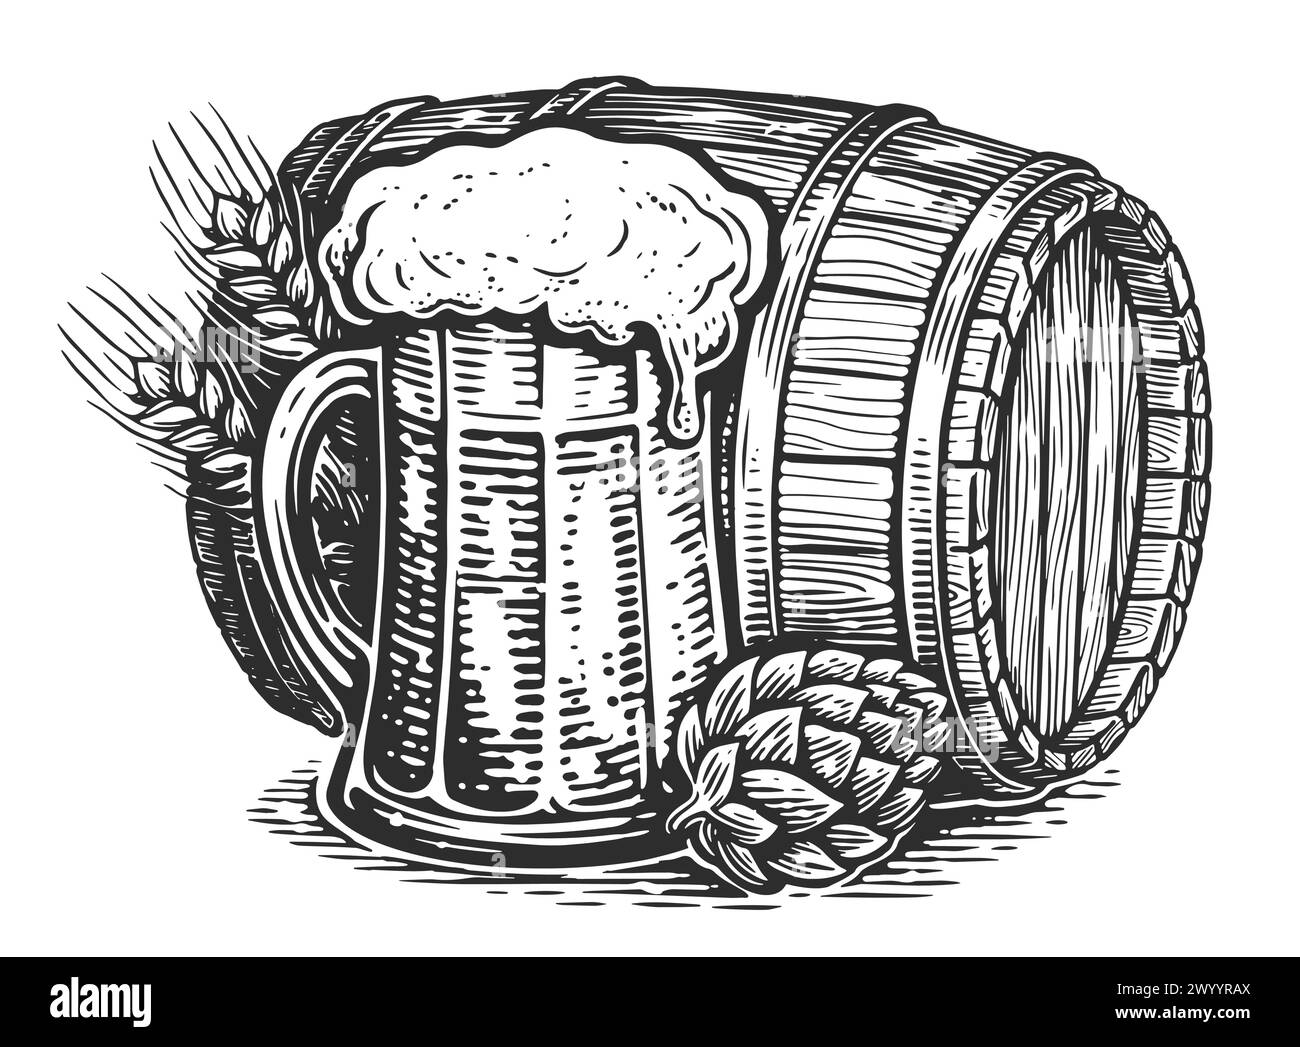 Beer in barrel and mug, sketch style. Hand drawn illustration for pub, brewery or restaurant menu Stock Vector